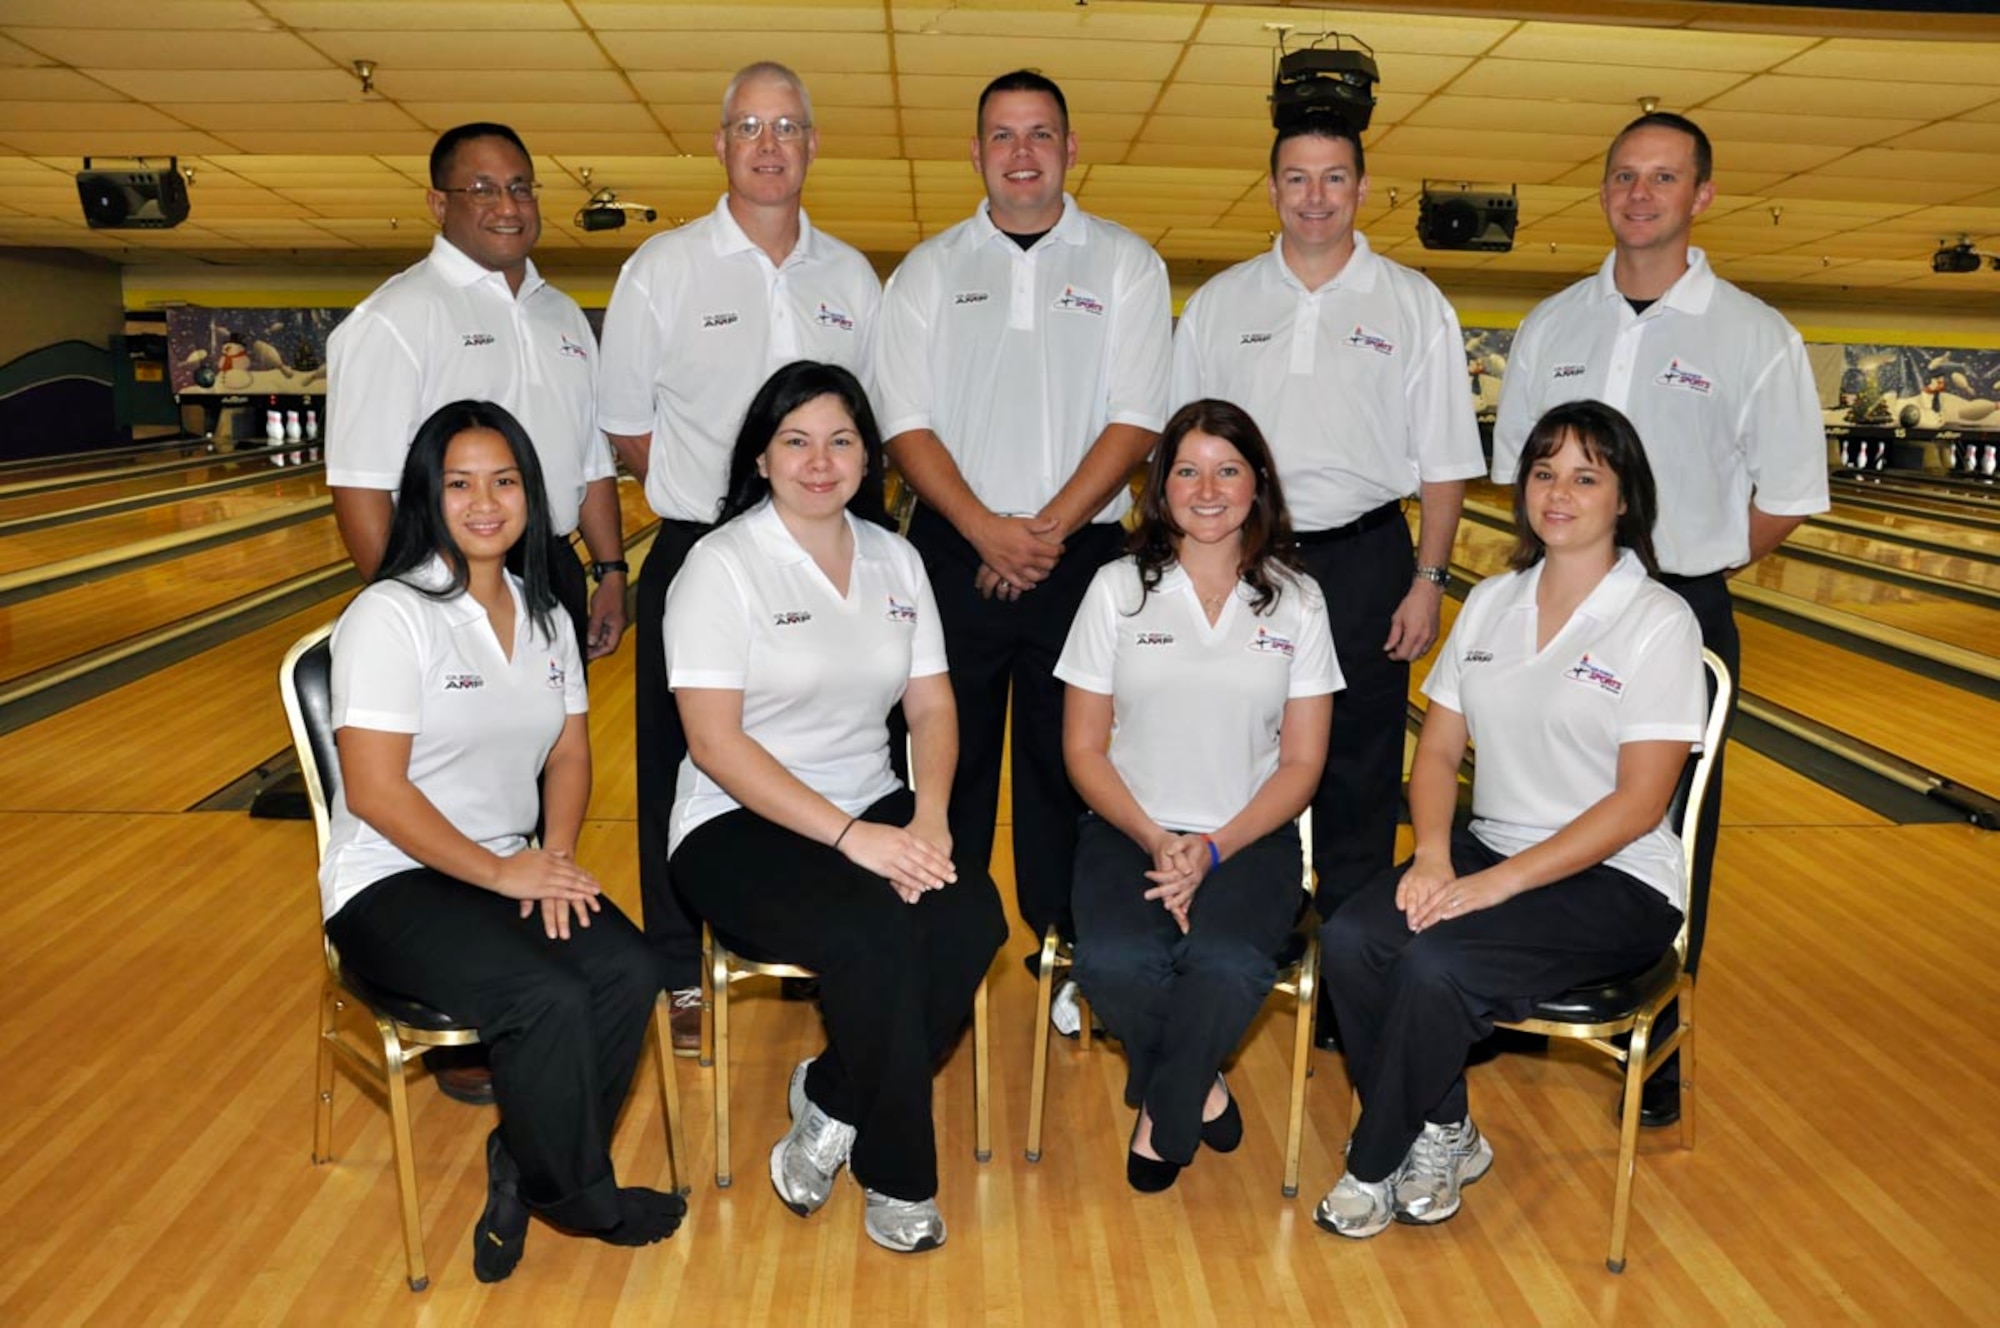 Members of the Air Force bowling team include (front row left to right):  Staff Sgt. Ireland Strickland, Staff Sgt. Natasha Sanchez, Tech. Sgt. Kristin Odekirk and Staff Sgt. Lisa Gibson; (back row left to right): Coach Steve Barinque, Chief Master Sgt. Scott Thomsen, Tech. Sgt. Joshua Chambliss, Tech. Sgt. David Tolson and 1st Lt. Jeffrey Robertson.  (U.S. Air Force photo)